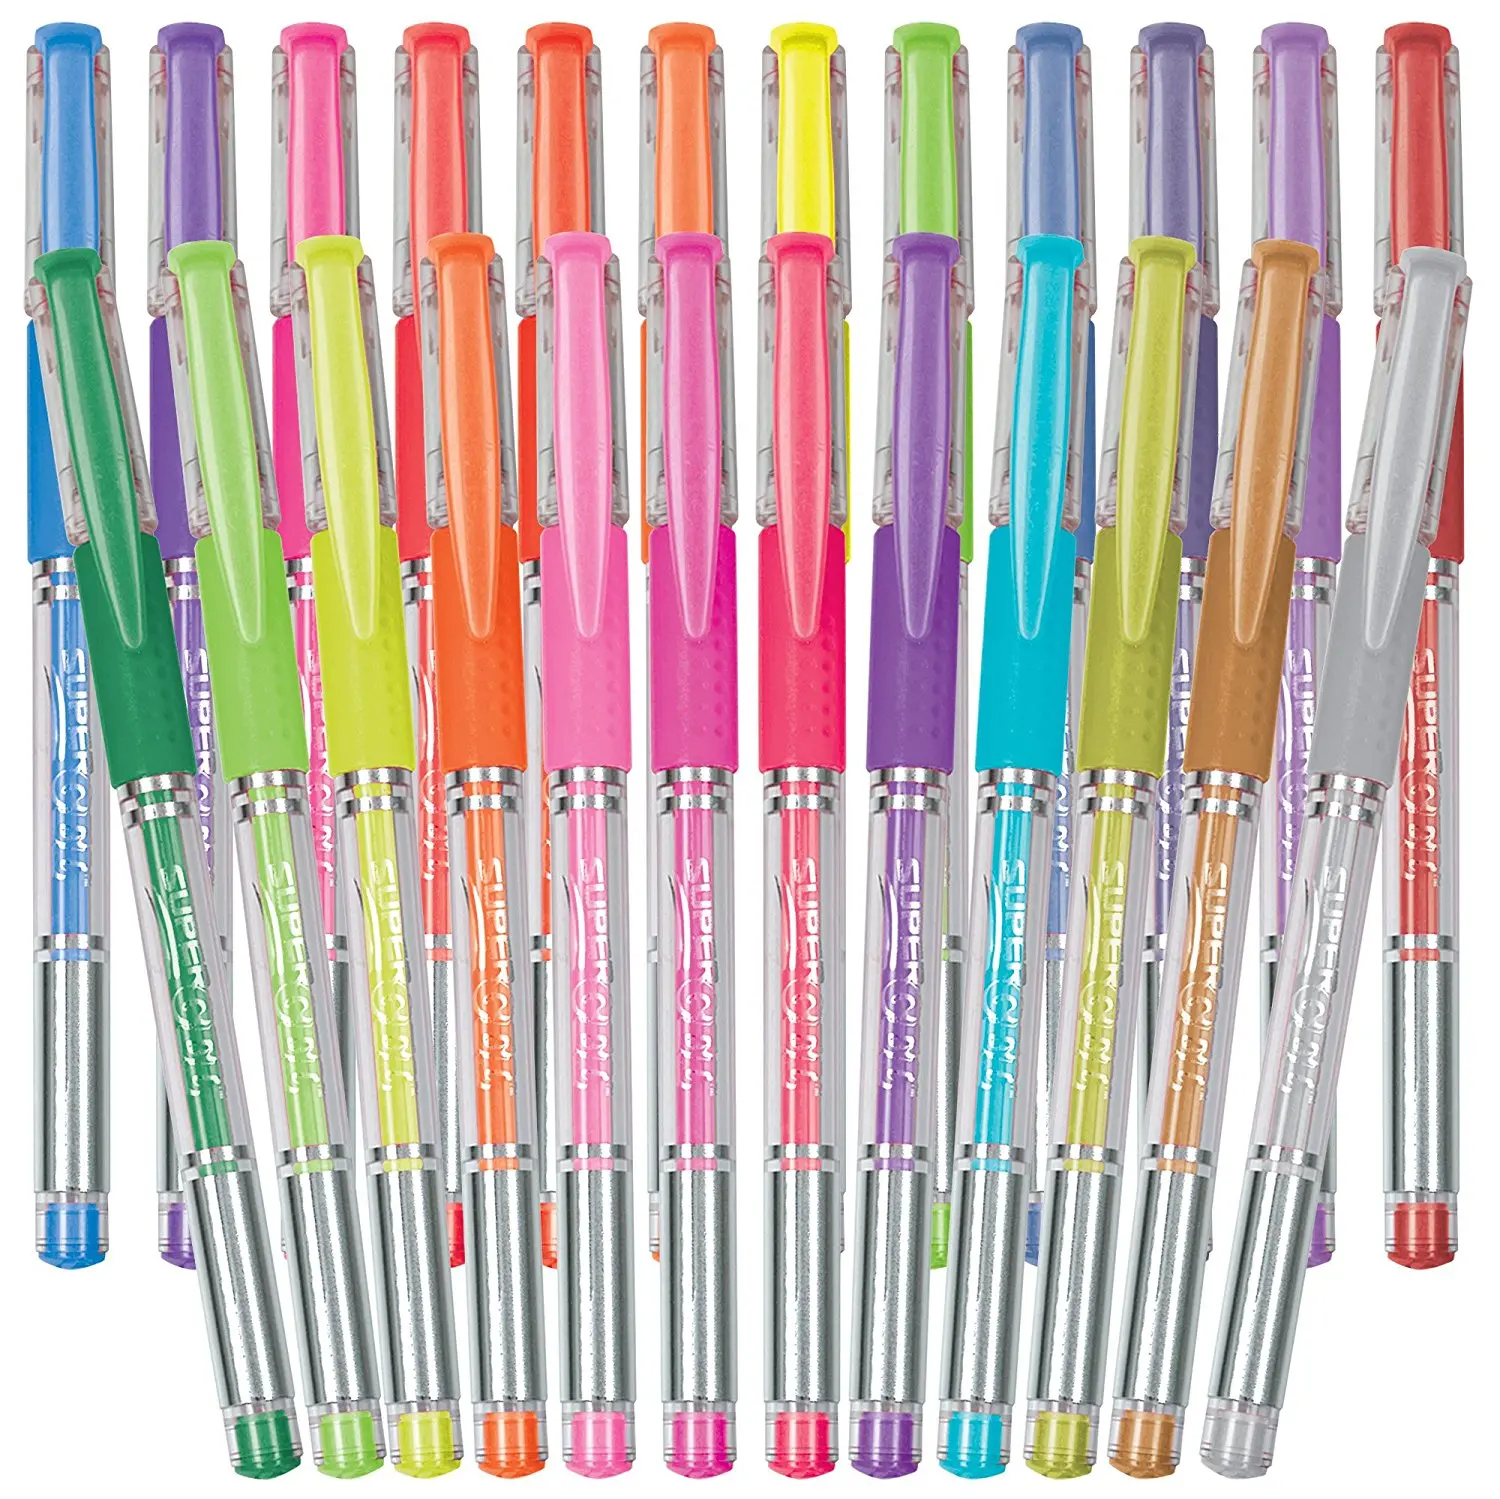 Write Dudes Scribble Stuff 24 Gel Pen Value Pack Assorted Colors/Styles (CY...